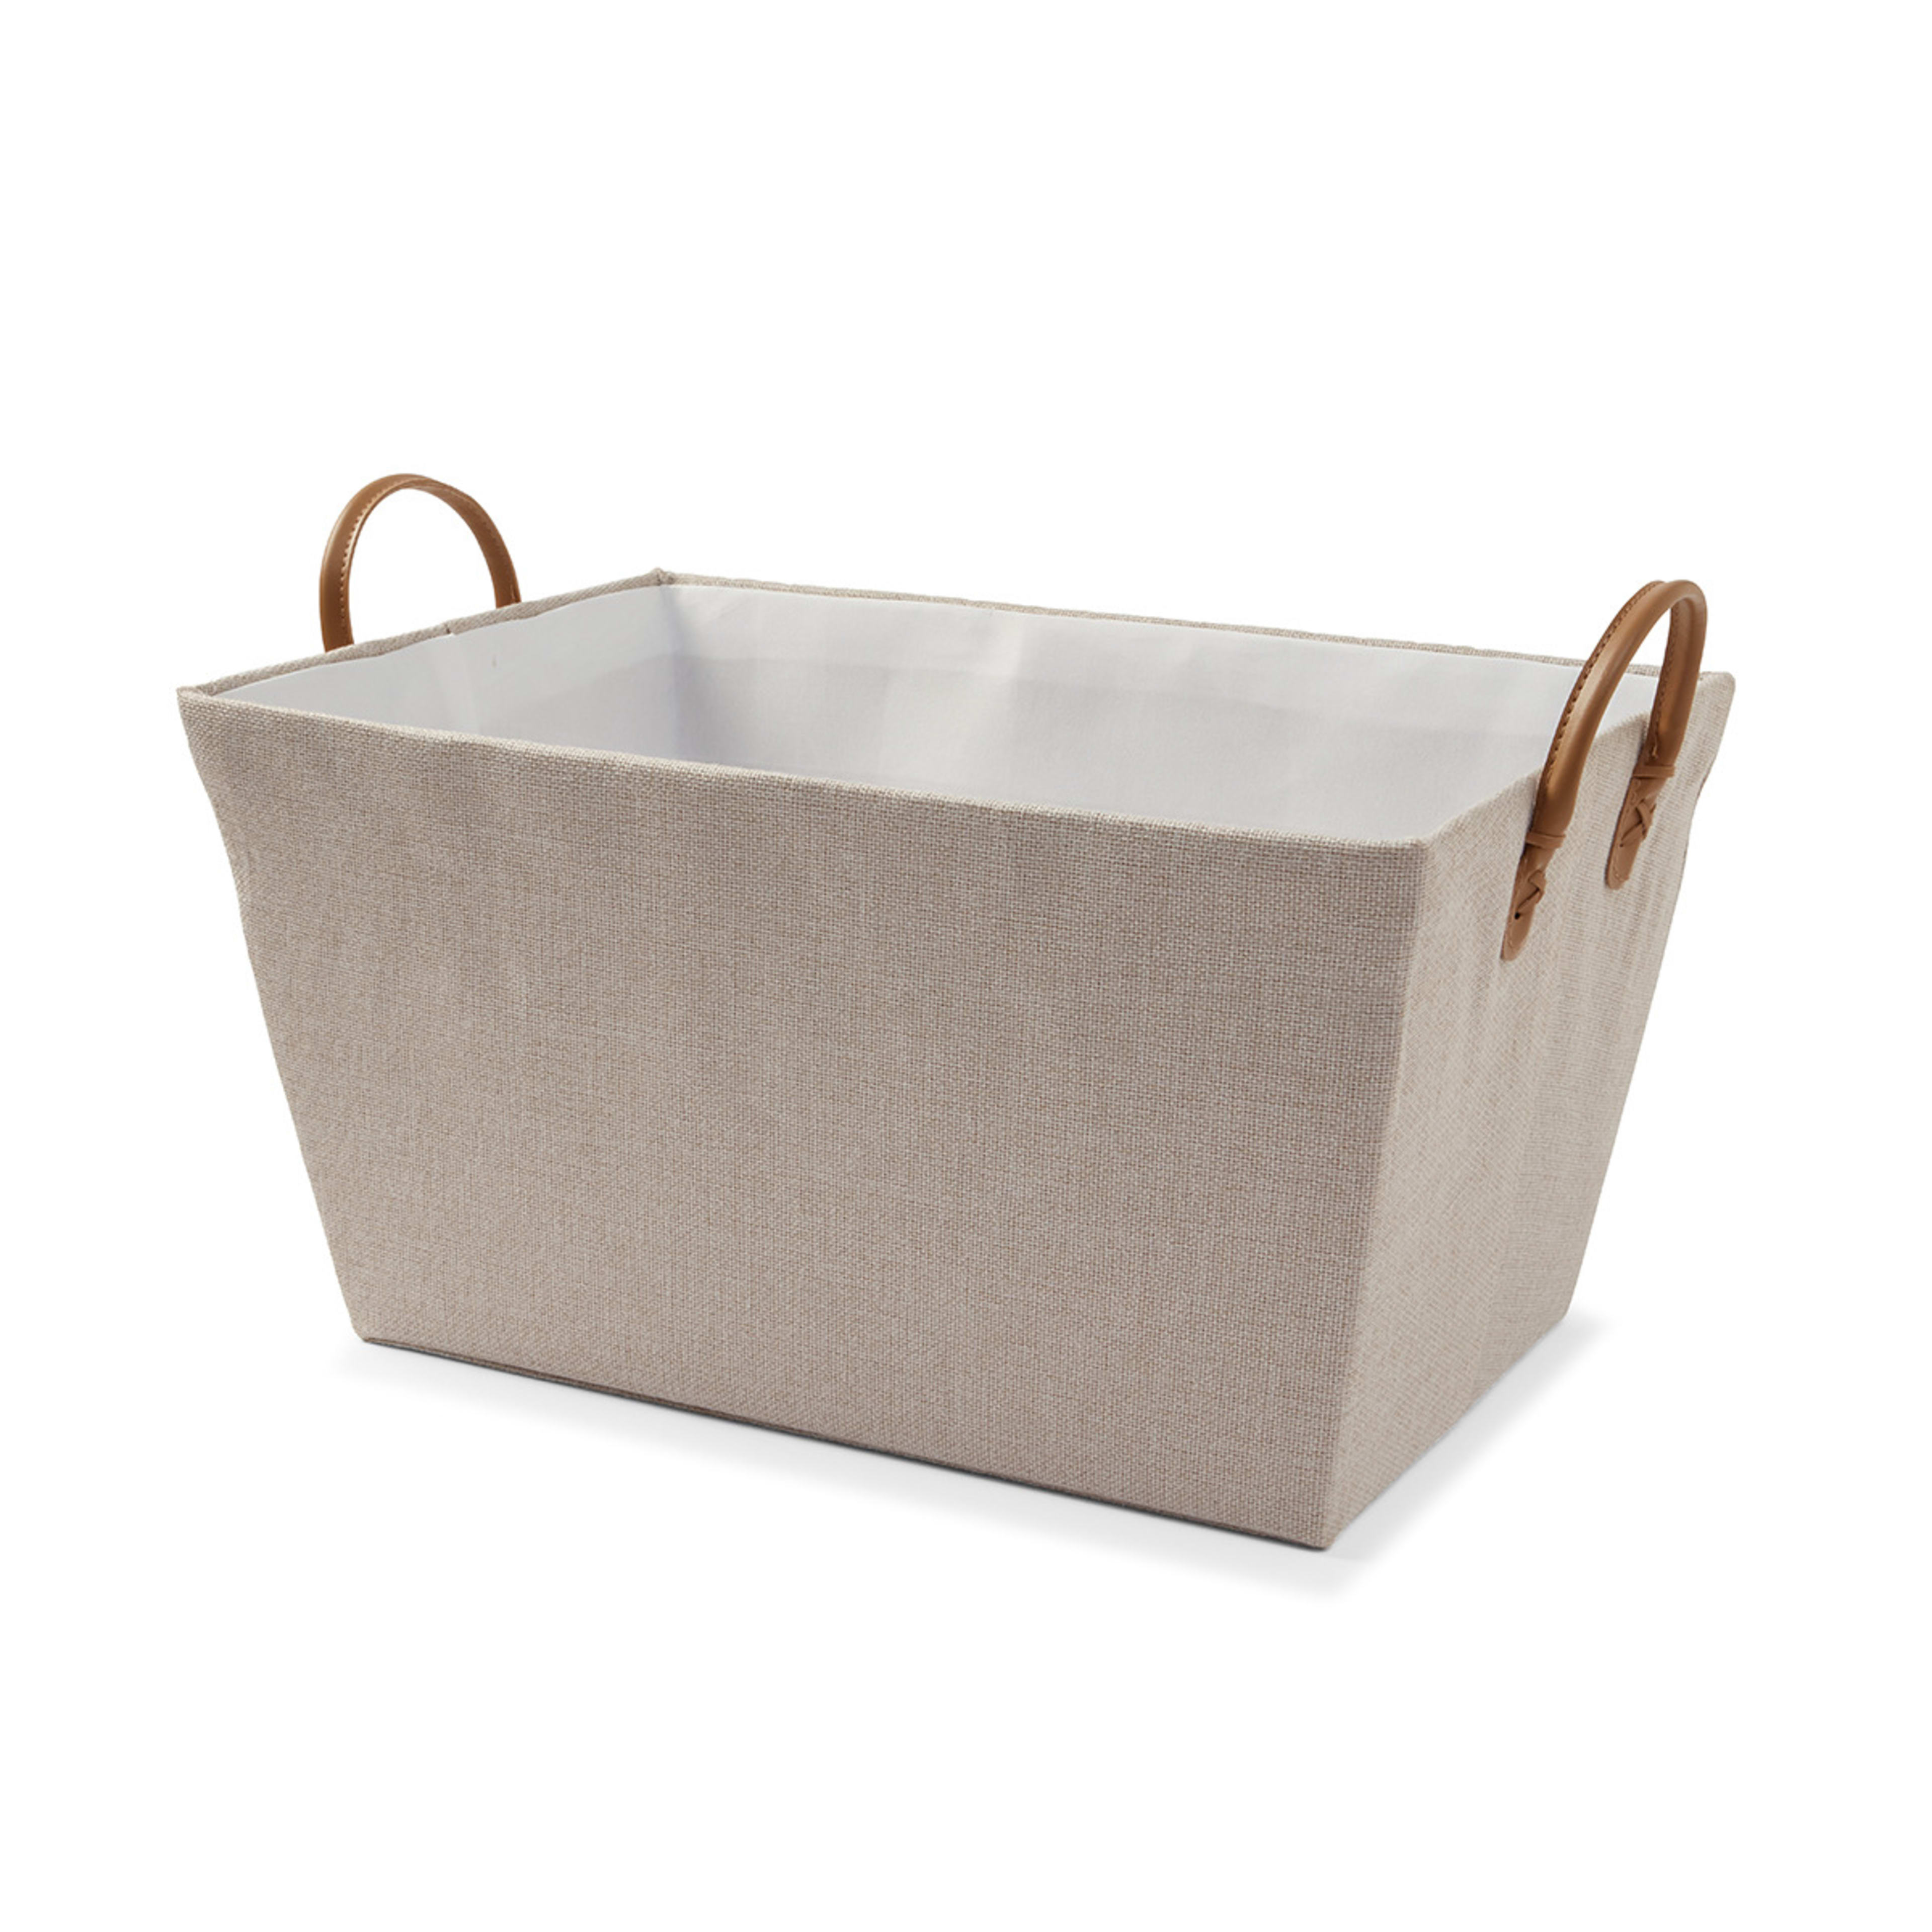 Linen Look Tapered Rectangle Basket - White and Beige - Kmart NZ